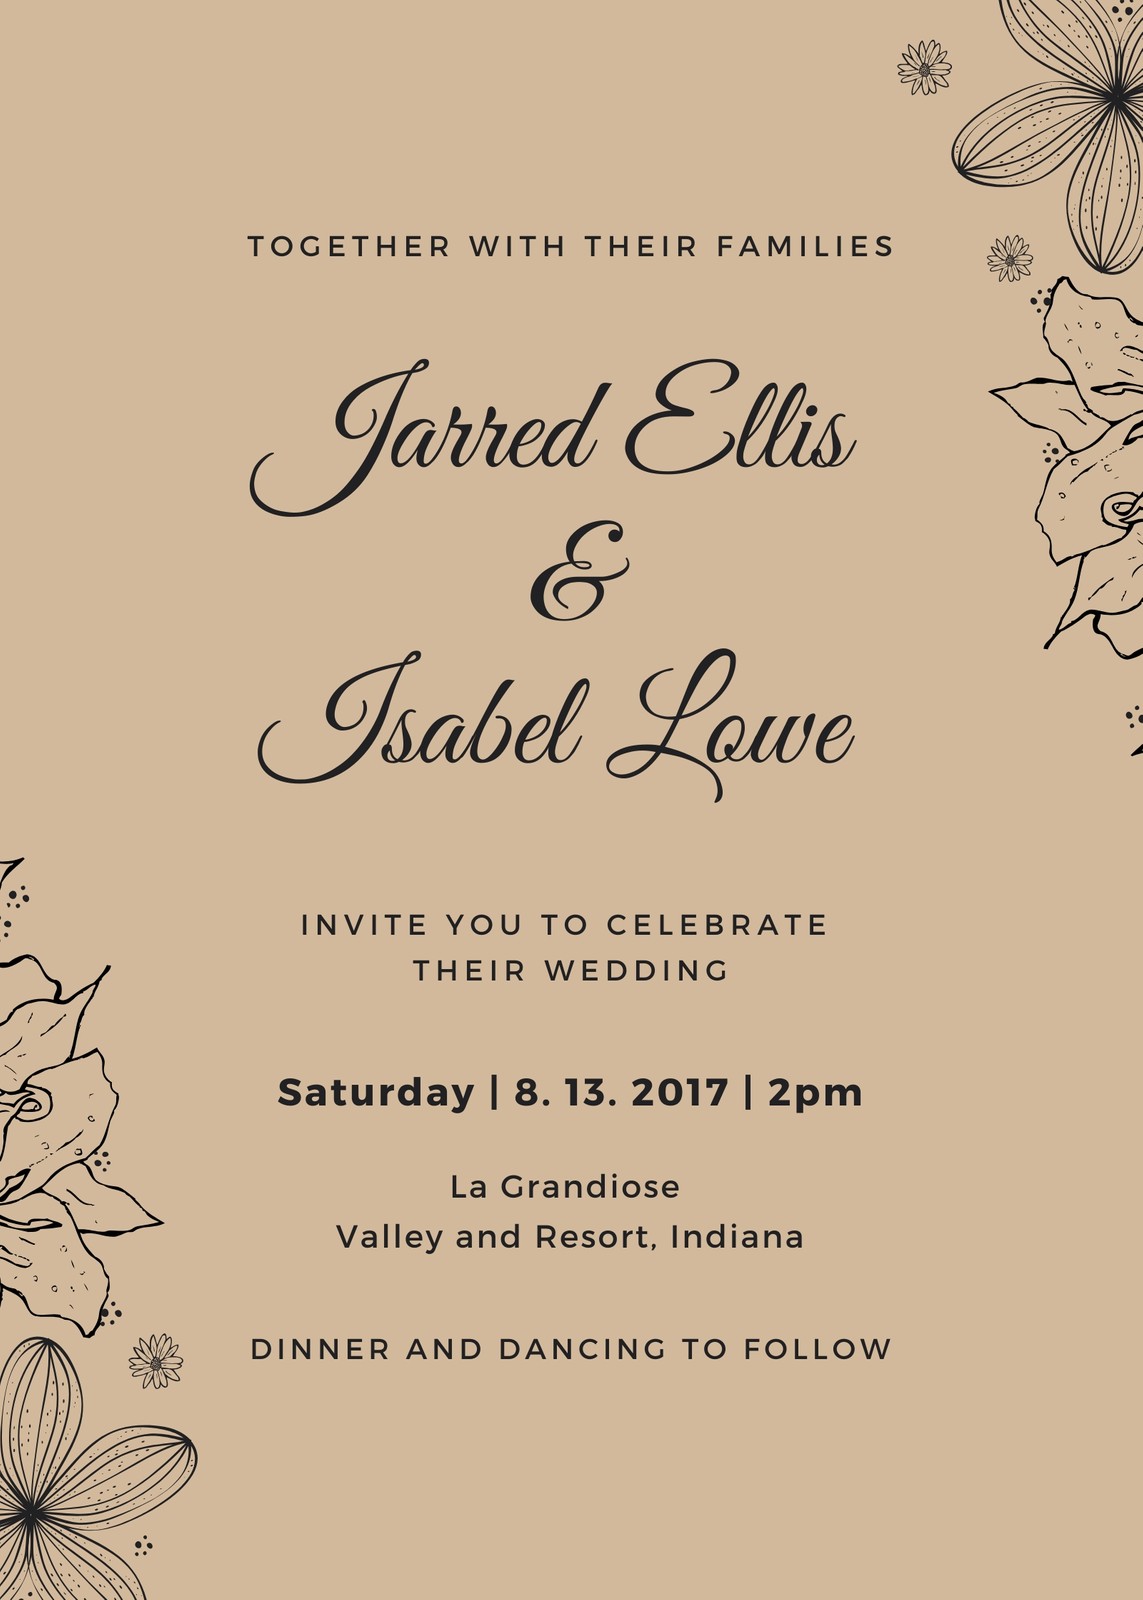 Wedding invitation templates to customize for free  Canva Throughout Invitation Cards Templates For Marriage